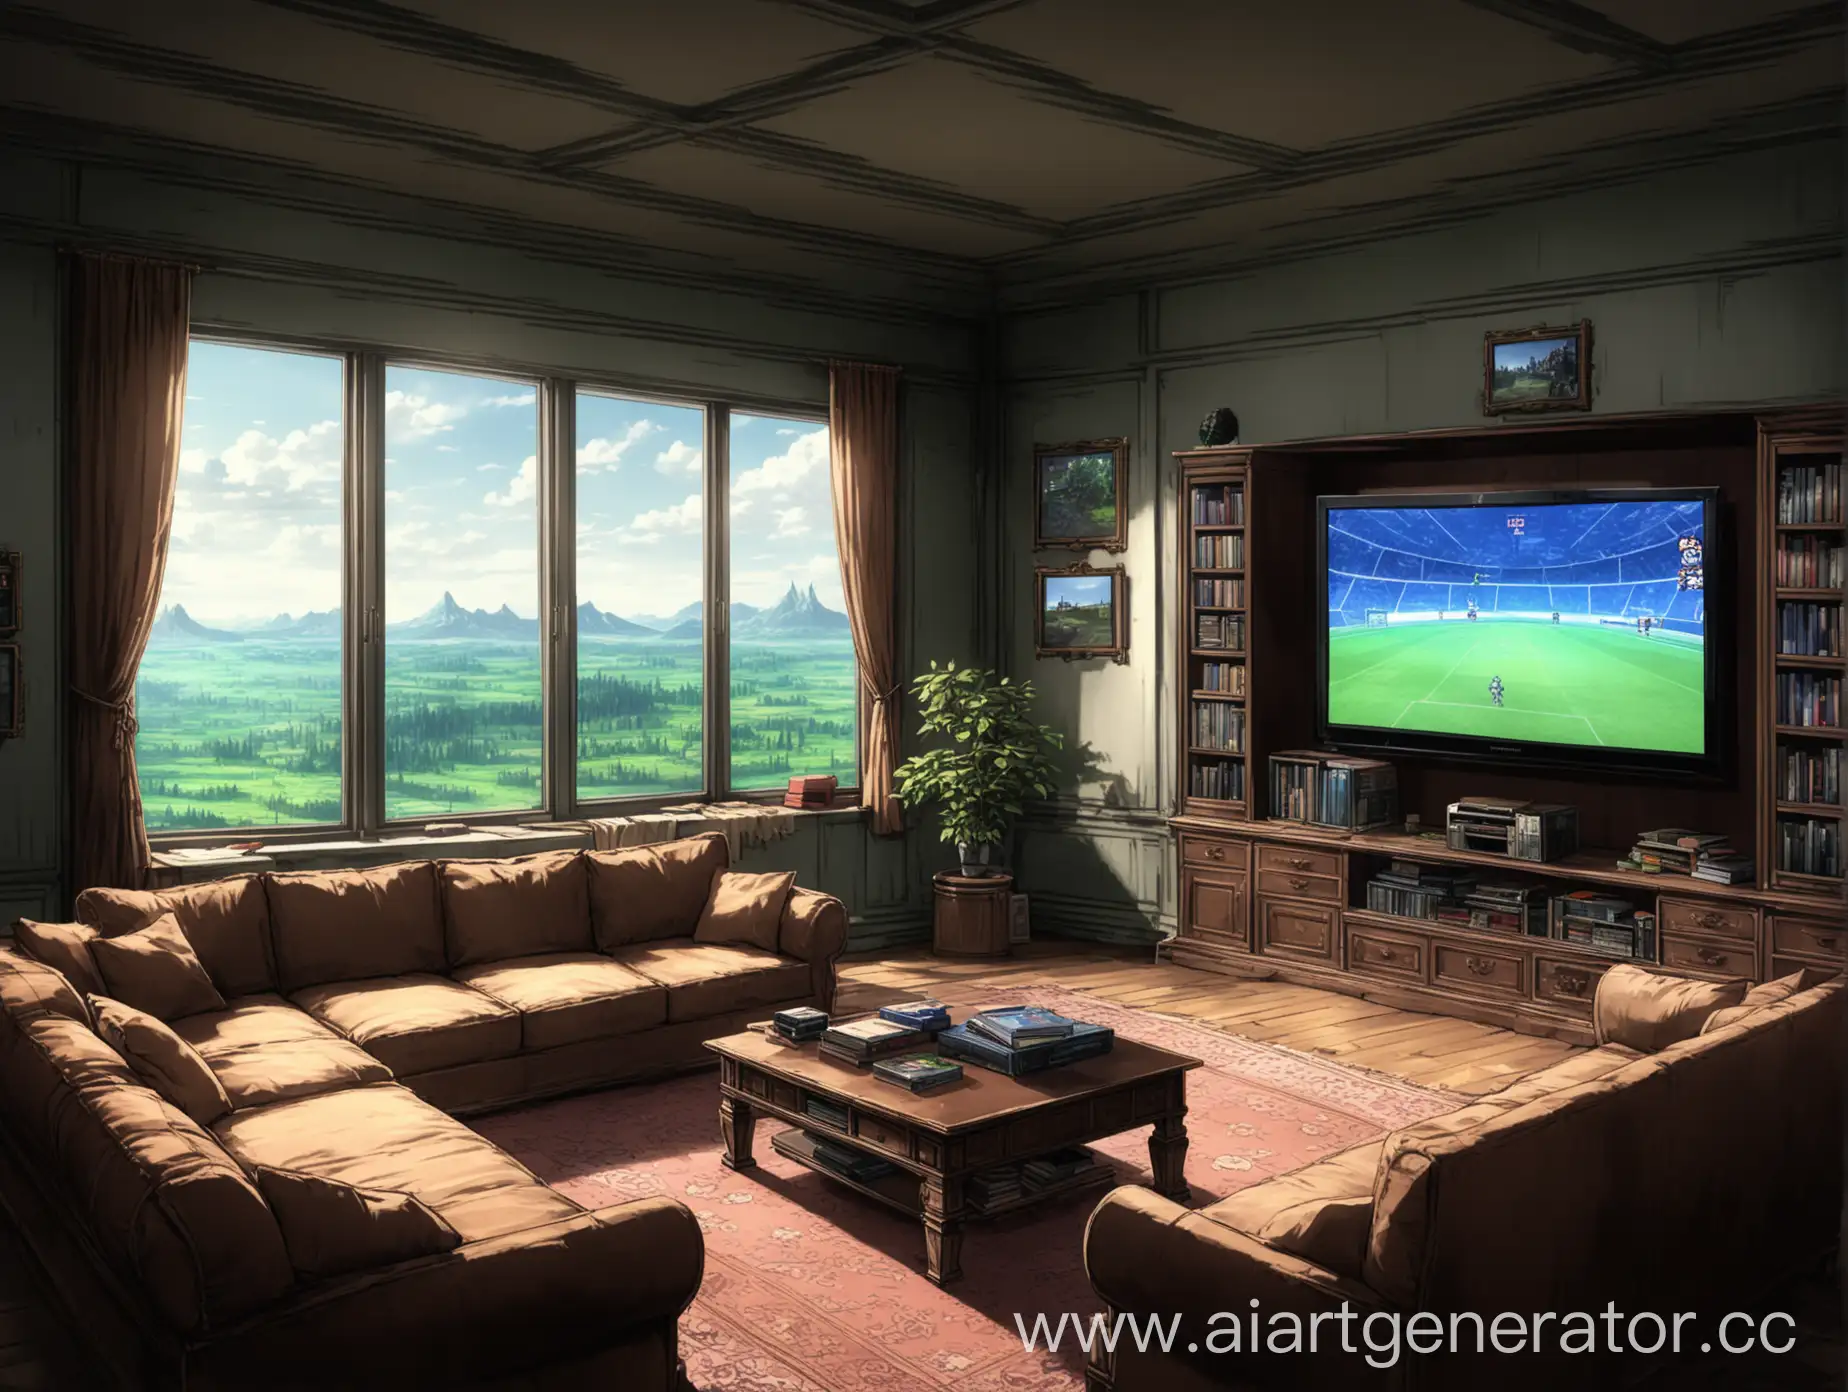 Luxurious-Game-Room-with-Expensive-Television-and-Cozy-Sofa